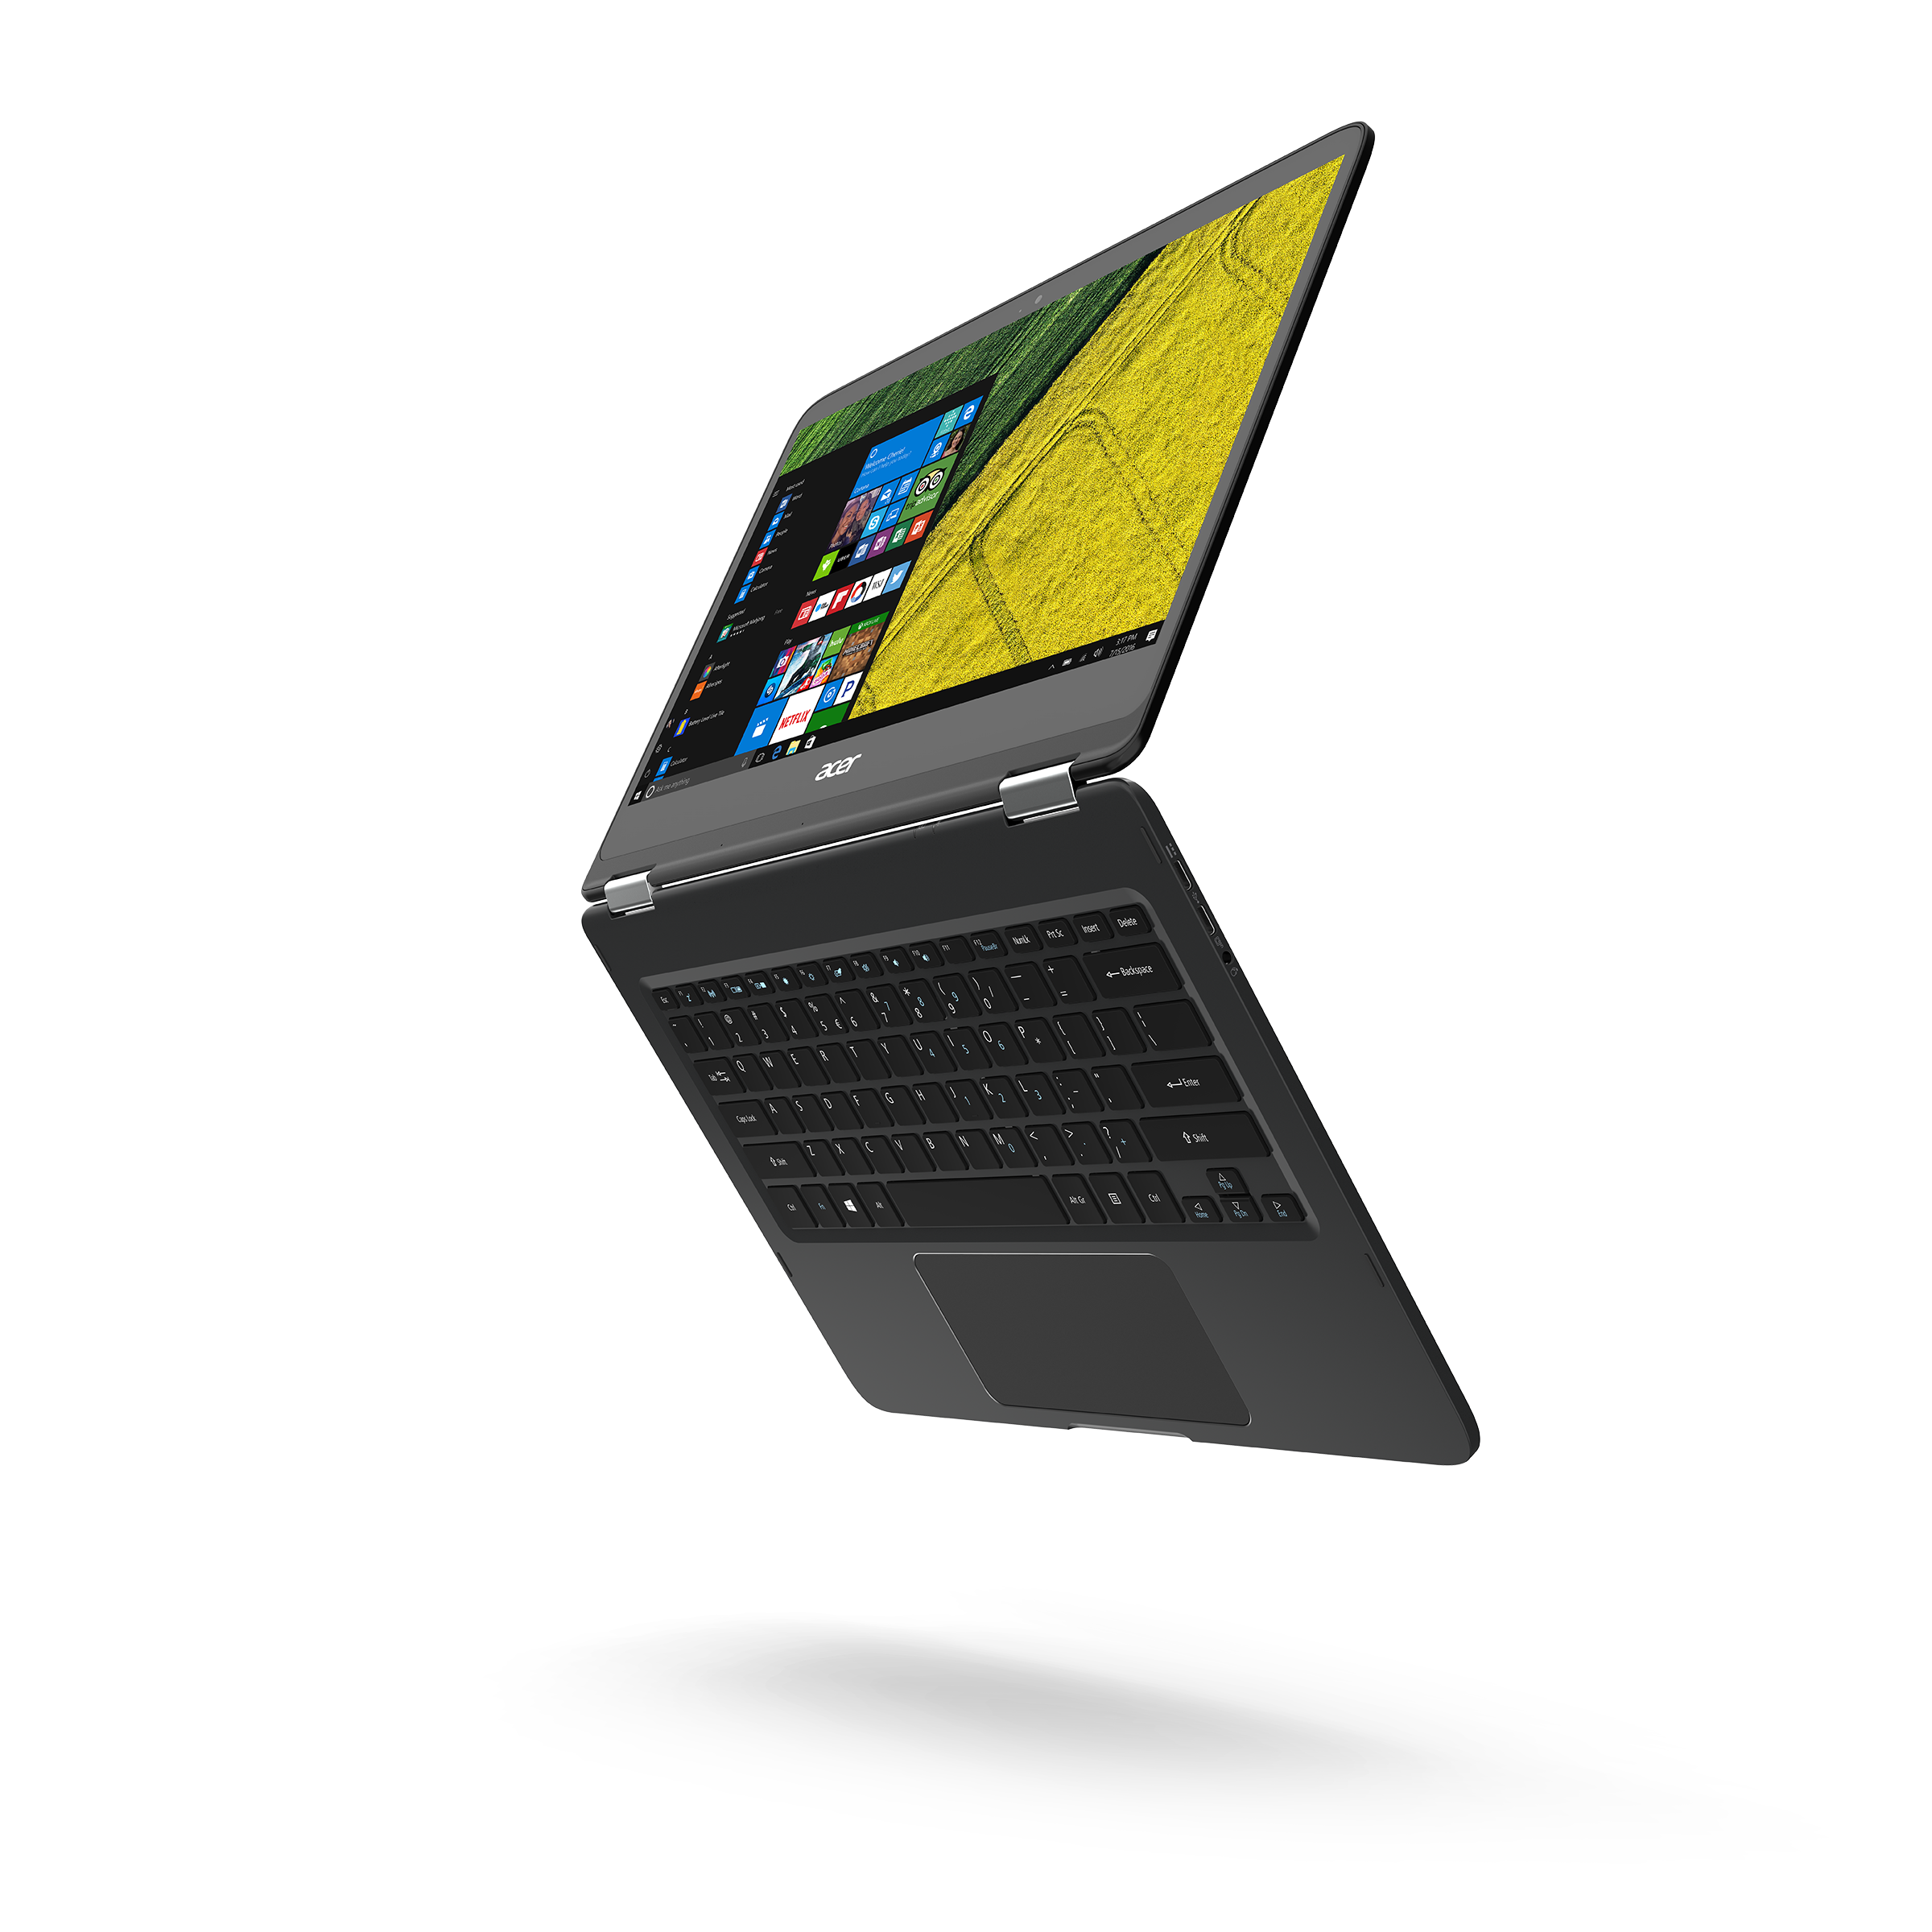 The Acer Spin 7 with Windows 10